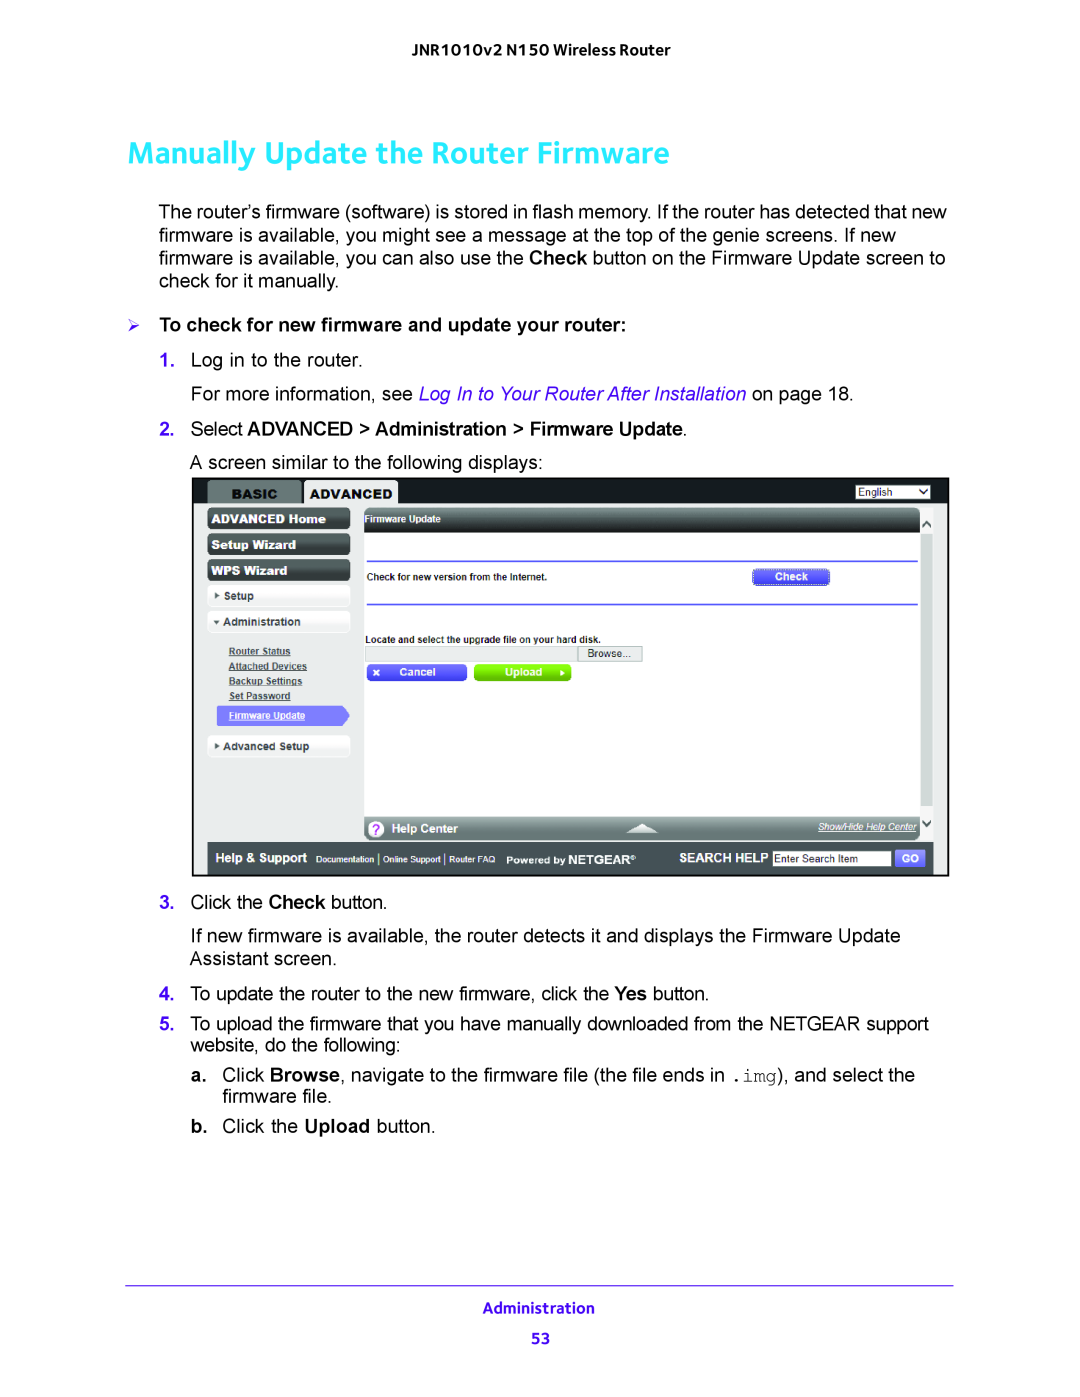 NETGEAR JNR1010V2 user manual Manually Update the Router Firmware,  To check for new firmware and update your router 